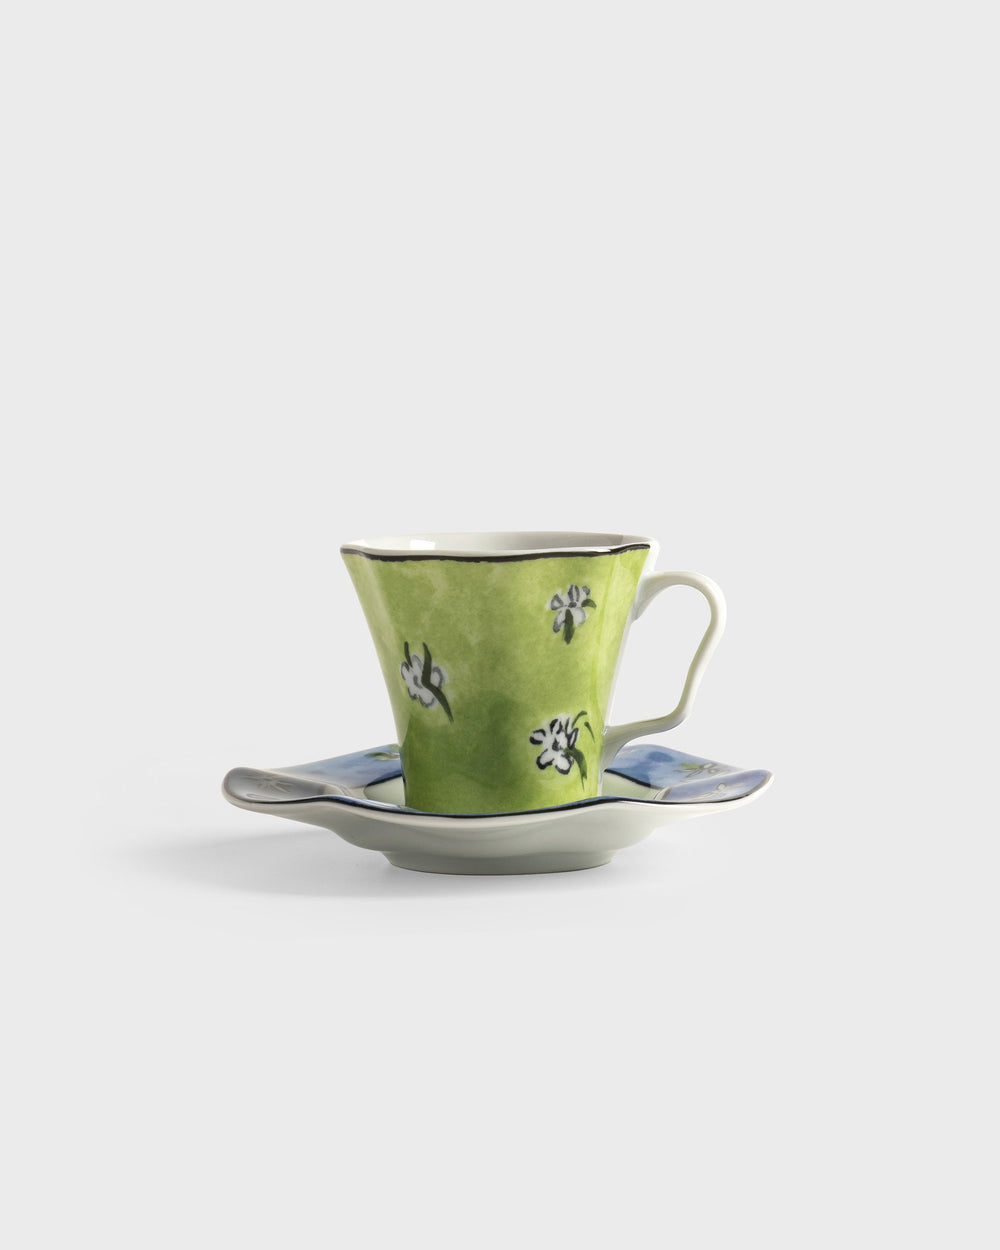 Tania Bulhoes Espresso Cup and Saucer Paraty